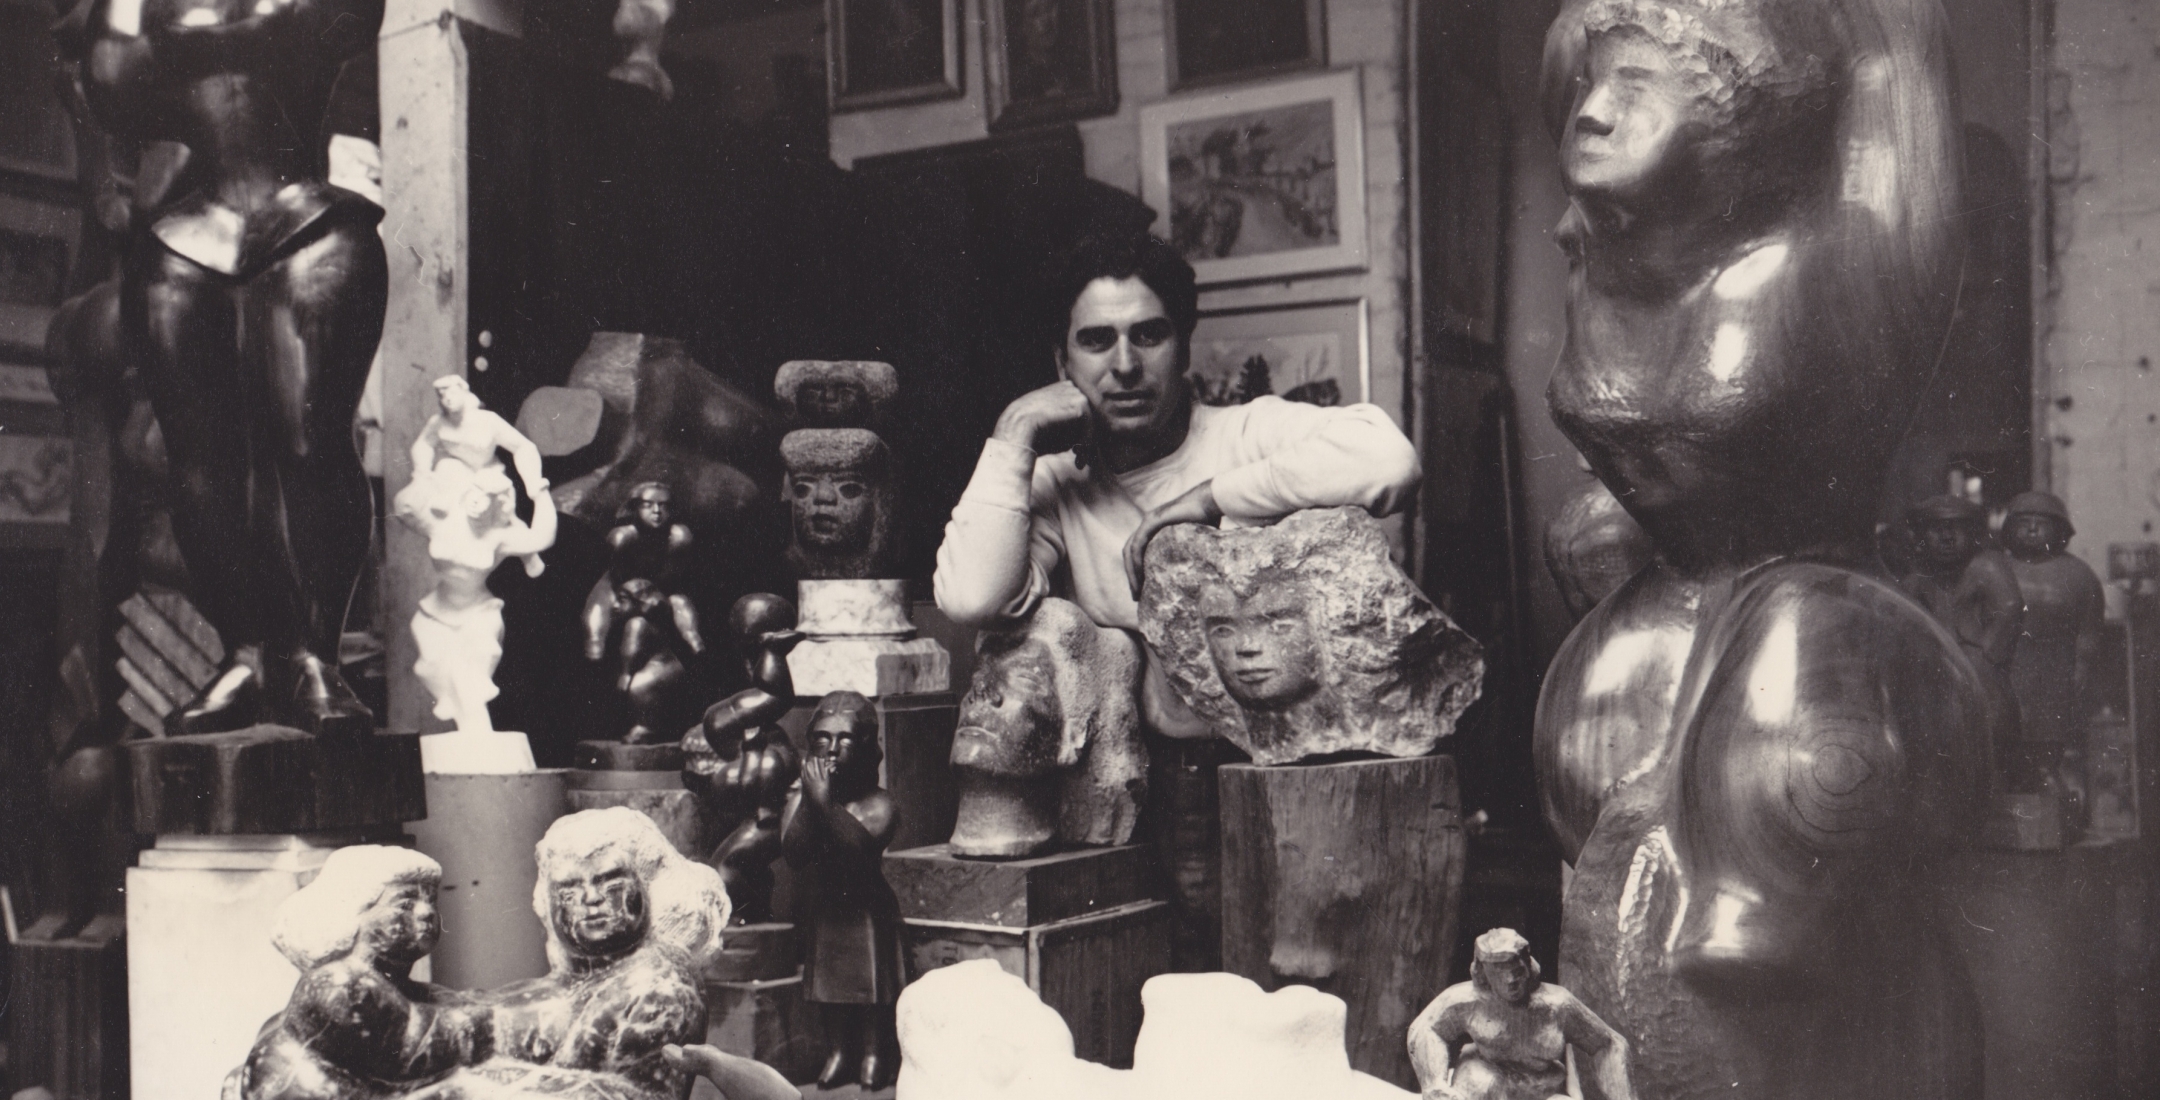 Black and white photo of a young Chaim Gross looking at the camera while surrounded by sculptures of various sizes and mediums.